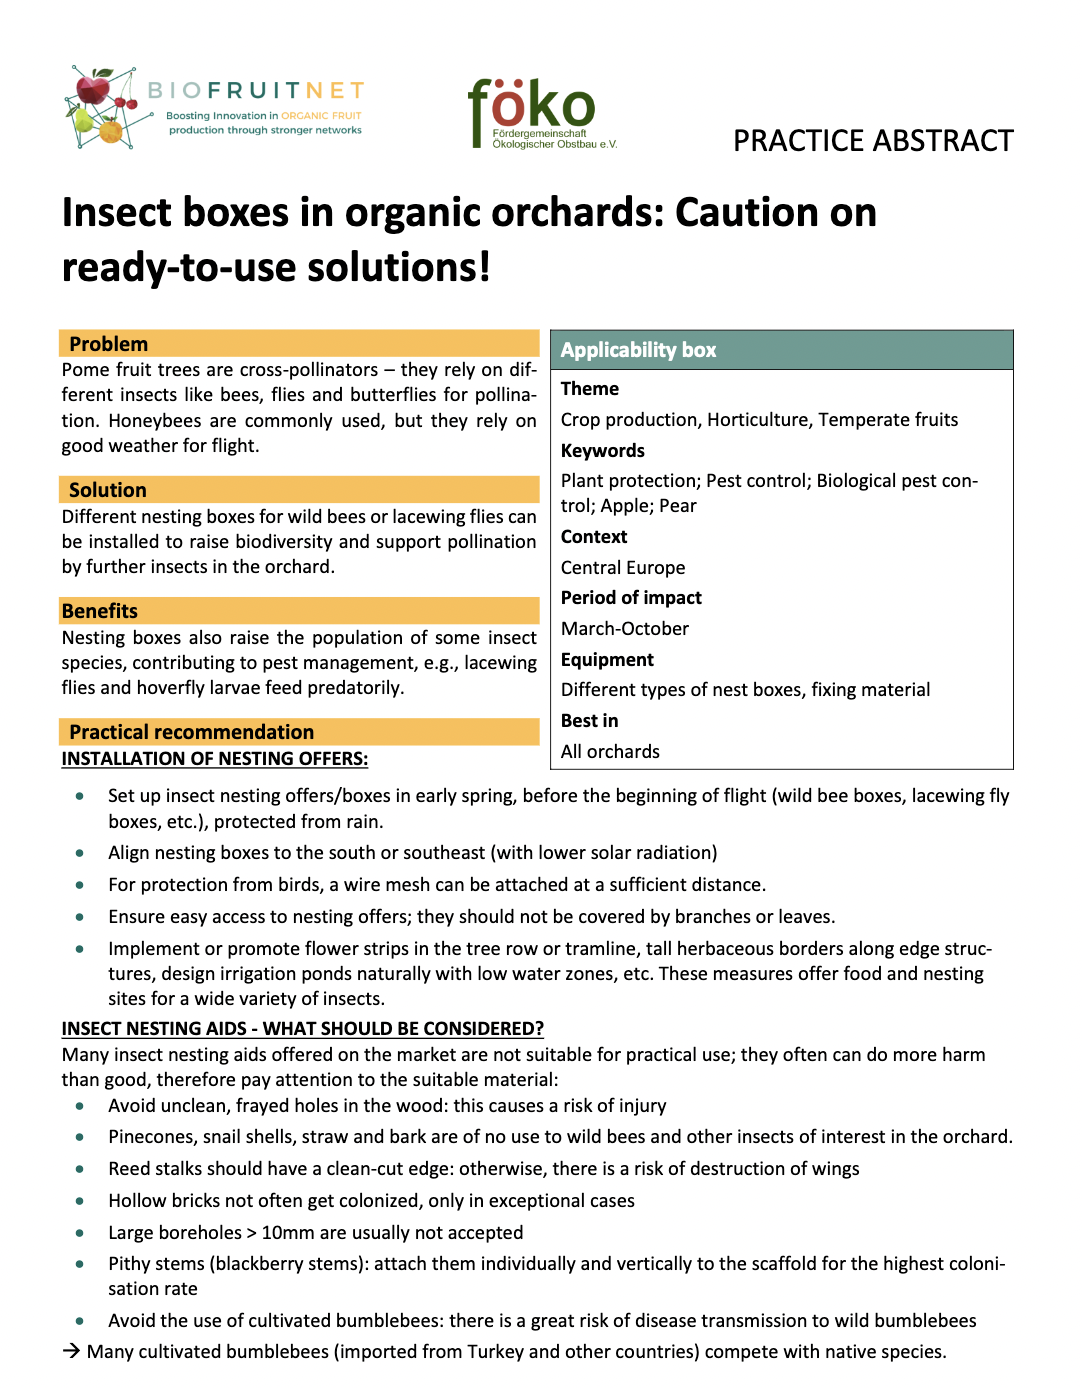 Insect boxes in organic orchards: Caution on ready-to-use solutions! (BIOFRUITNET Practice Abstract)